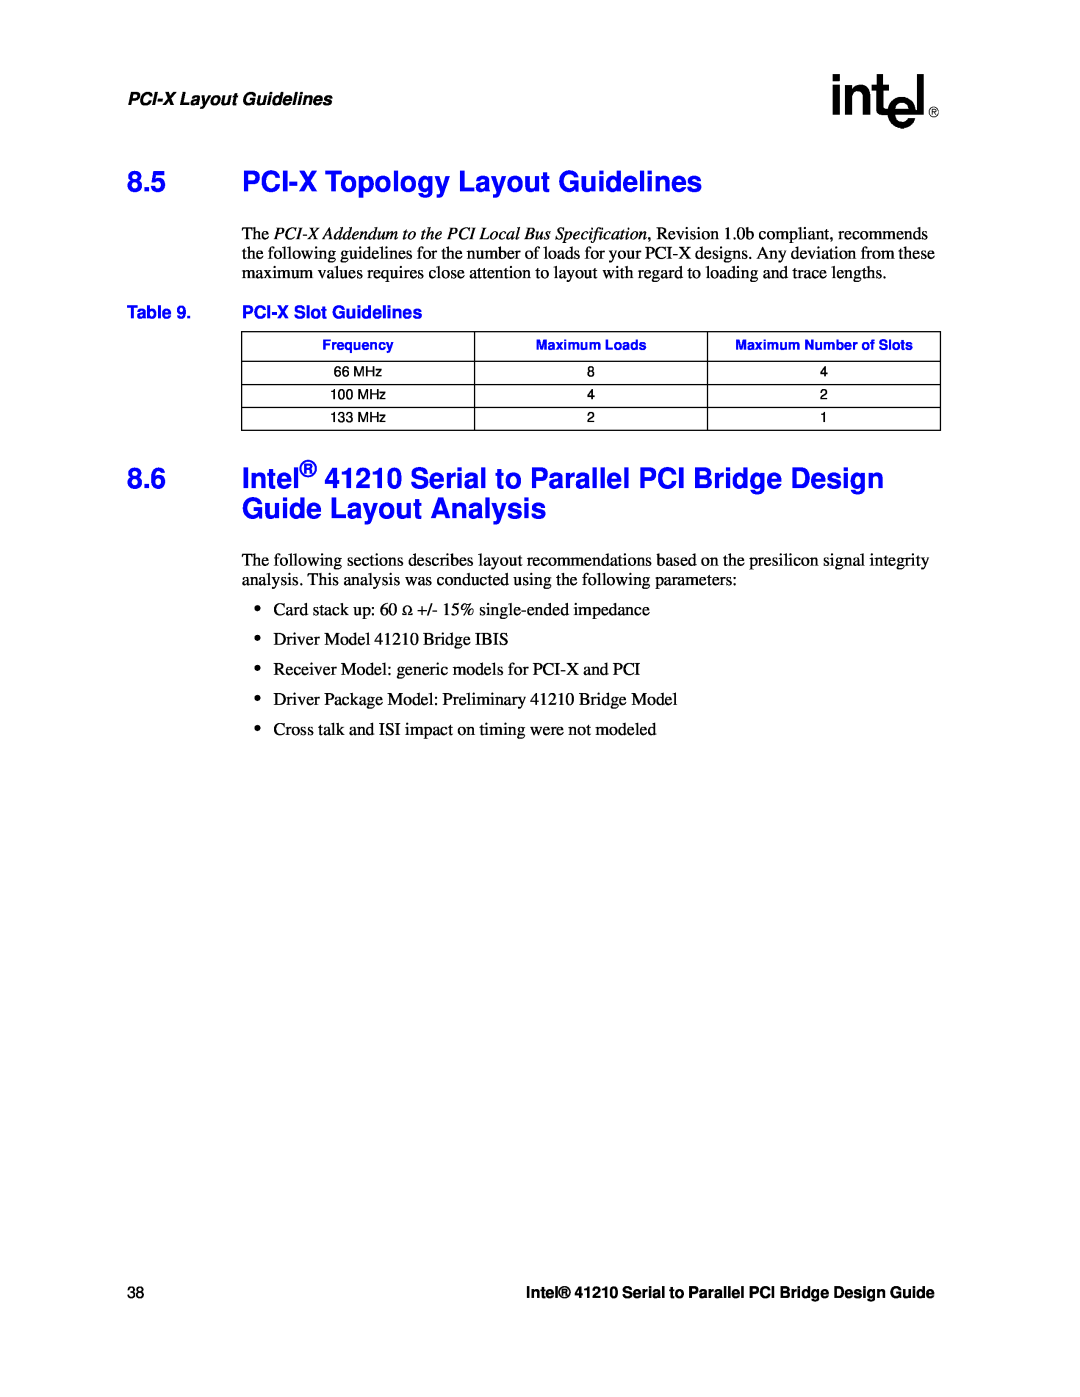 Intel 41210 manual PCI-X Topology Layout Guidelines, PCI-X Slot Guidelines, PCI-X Layout Guidelines 